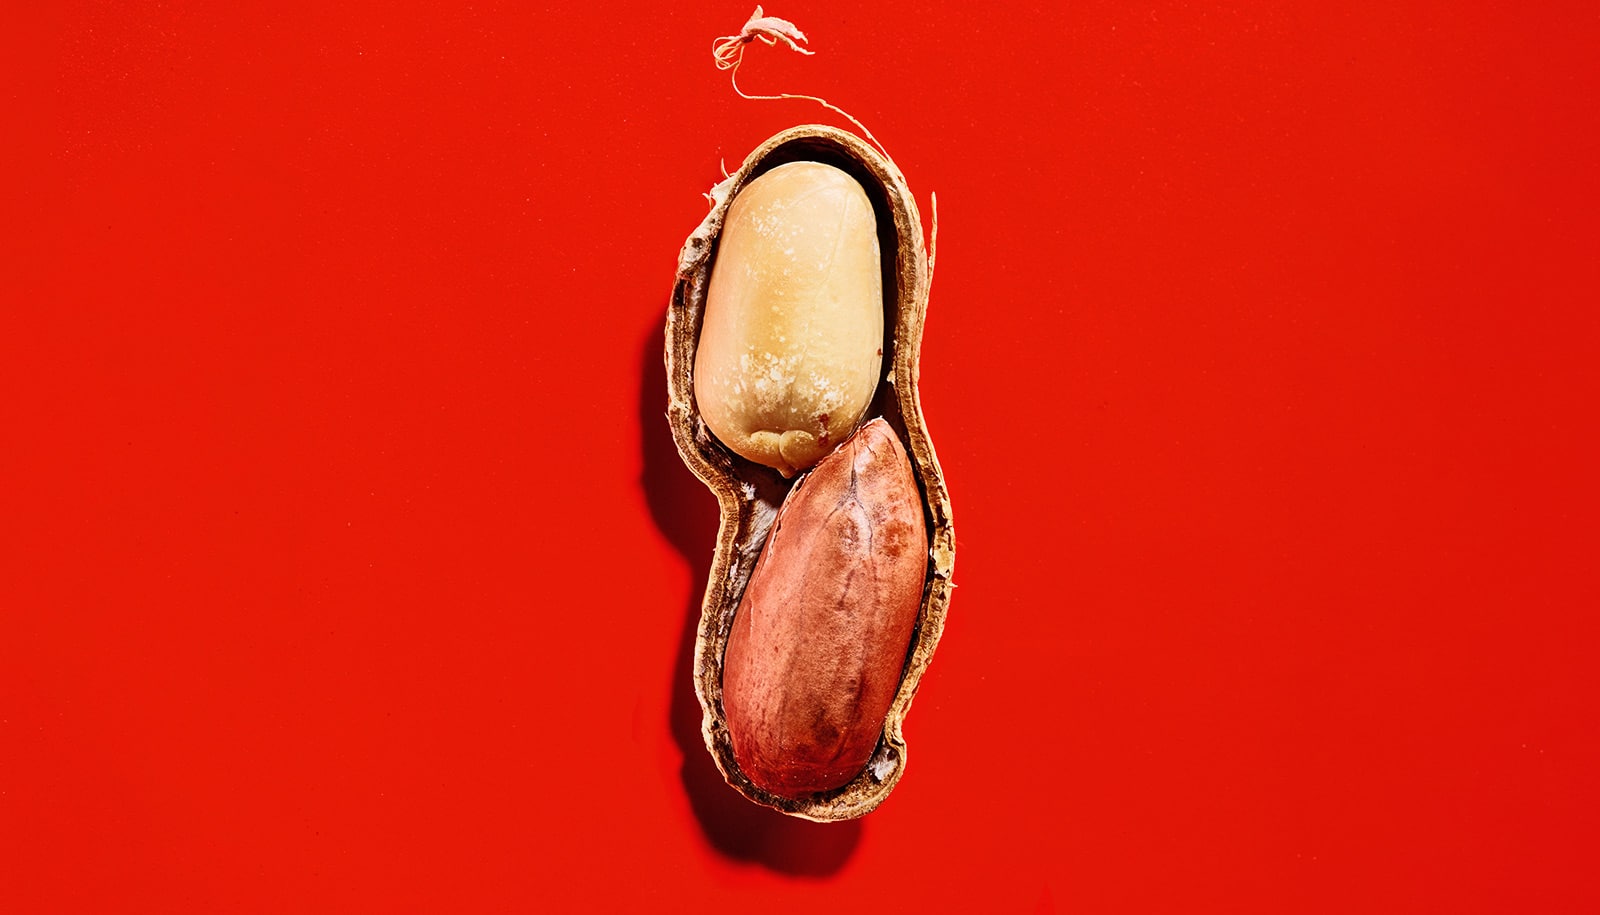 A peanut with half the shell off sitting on a red background.